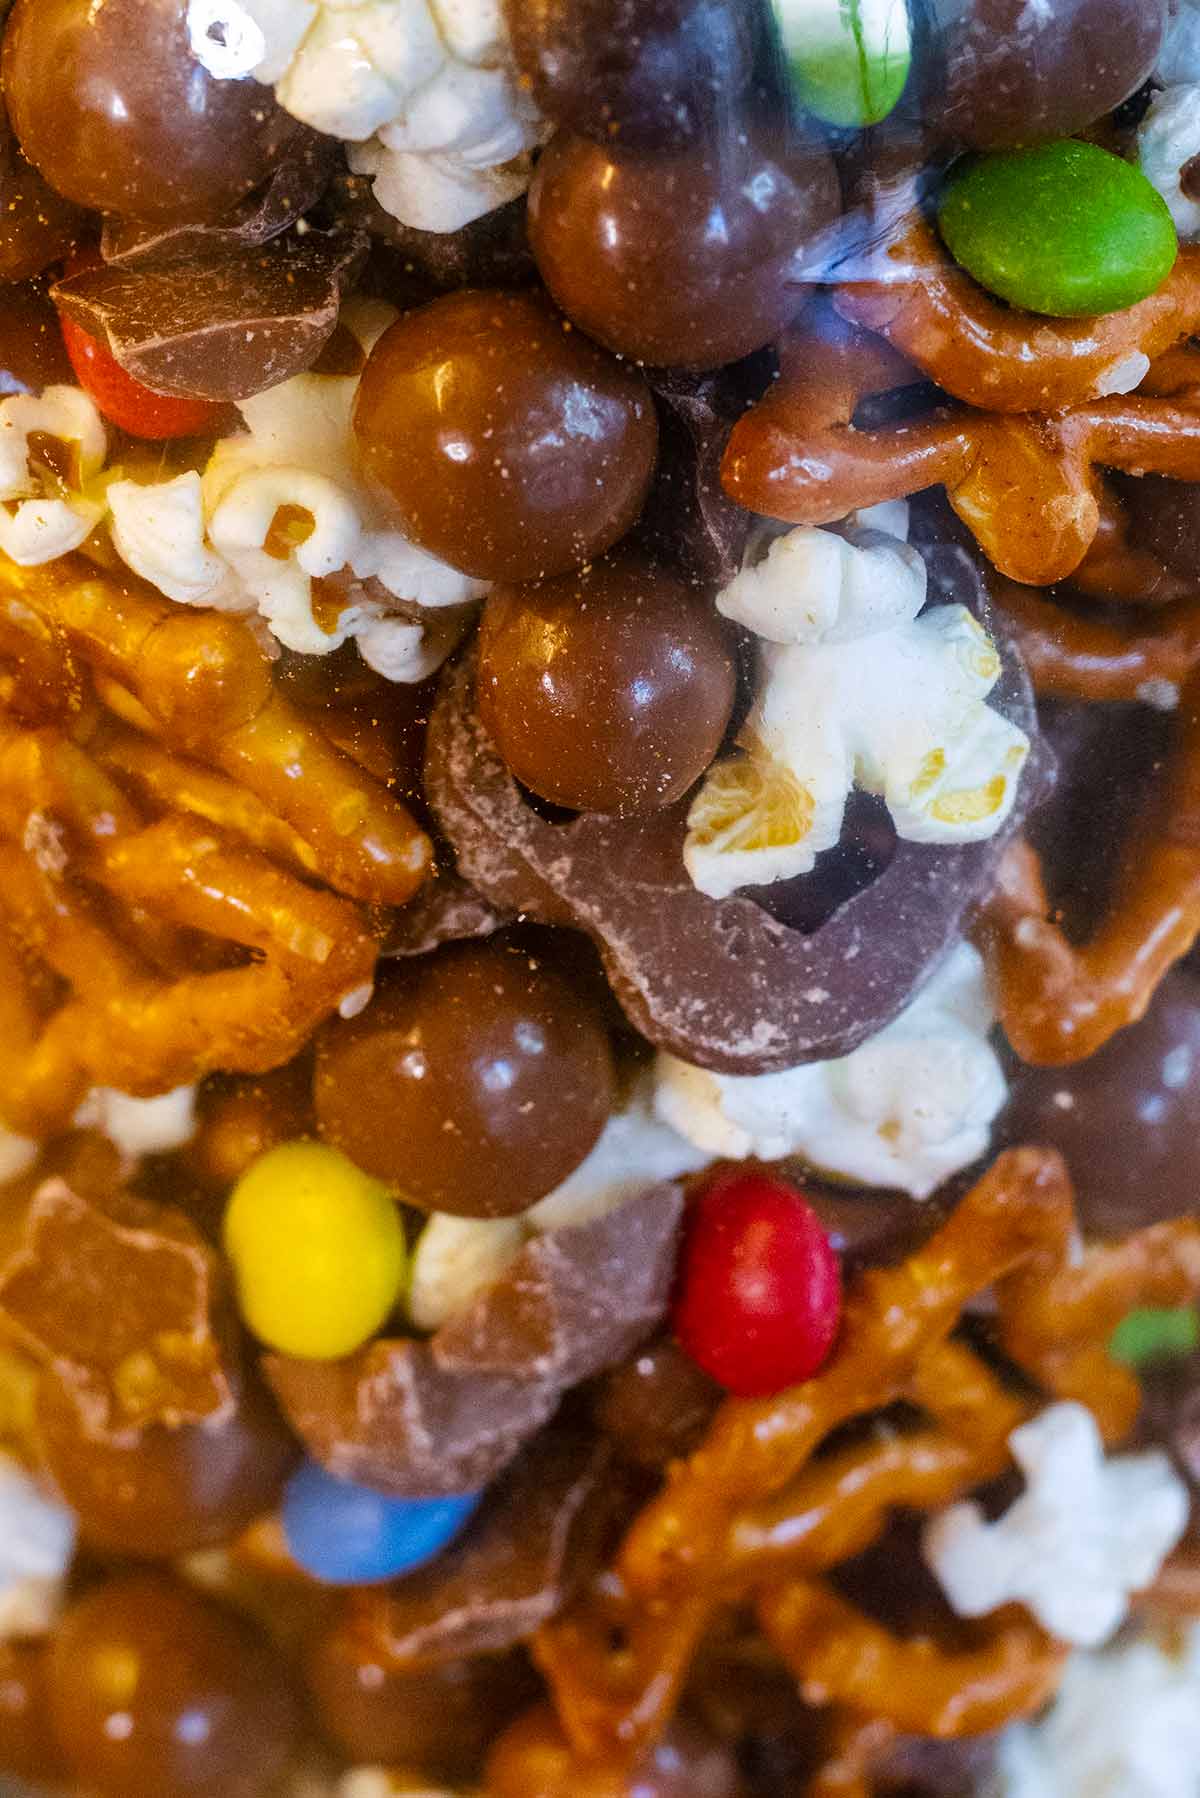 Maltesers, Smarties and chocolate stars, mixed into popcorn and pretzels.